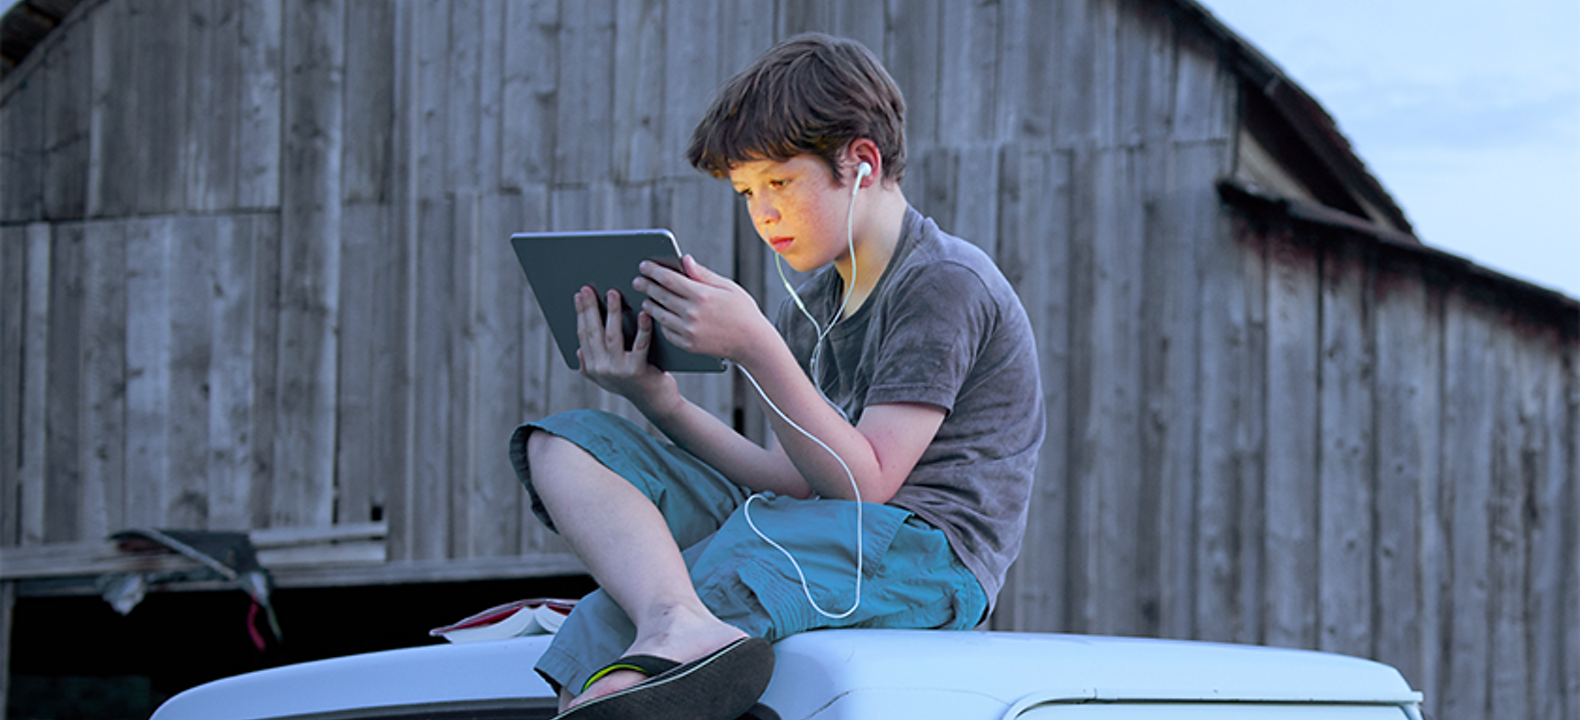 Boy sitting on top of truck looking at screen